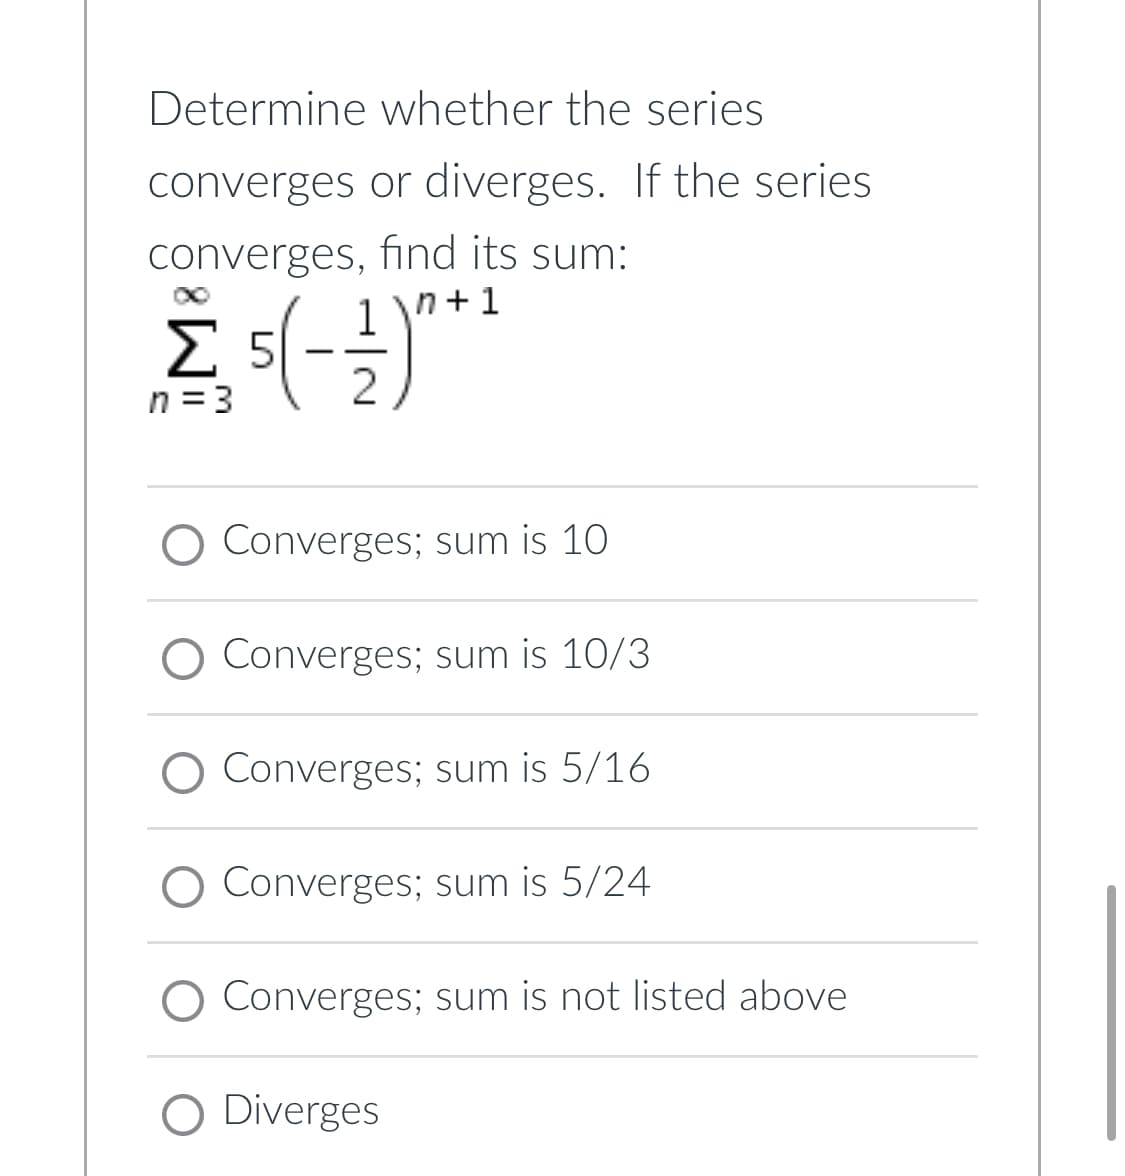 Determine whether the series
converges or diverges. If the series
converges, find its sum:
n+1
Σ 5
2
|
n = 3
O Converges; sum is 10
O Converges; sum is 10/3
O Converges; sum is 5/16
O Converges; sum is 5/24
Converges; sum is not listed above
O Diverges
